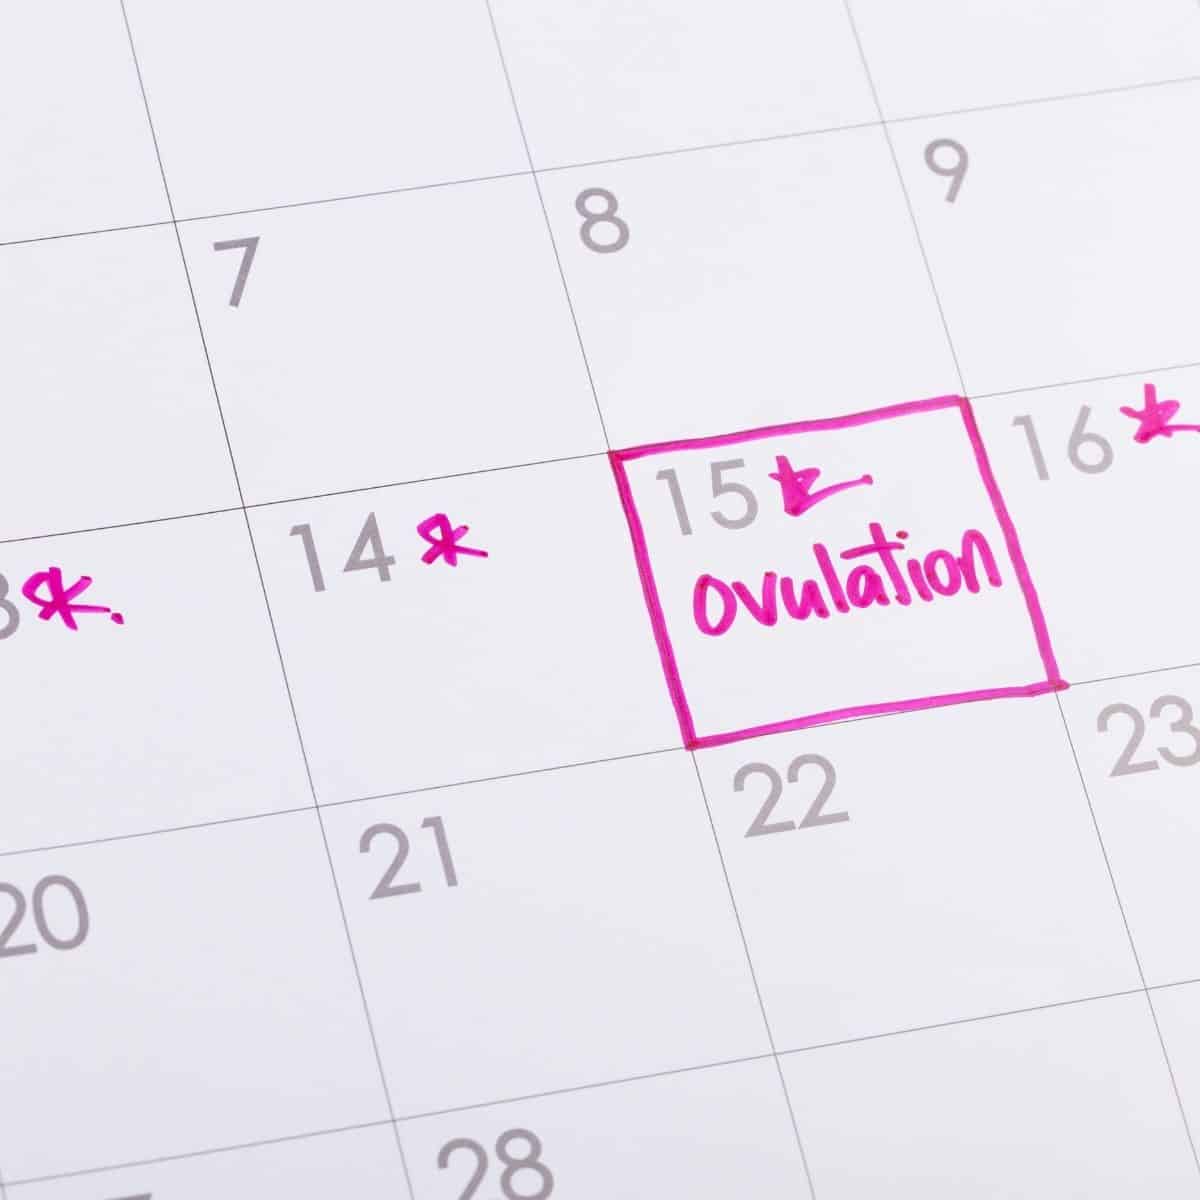 ovulation written in pink marker on the 15th of the month on a calendar